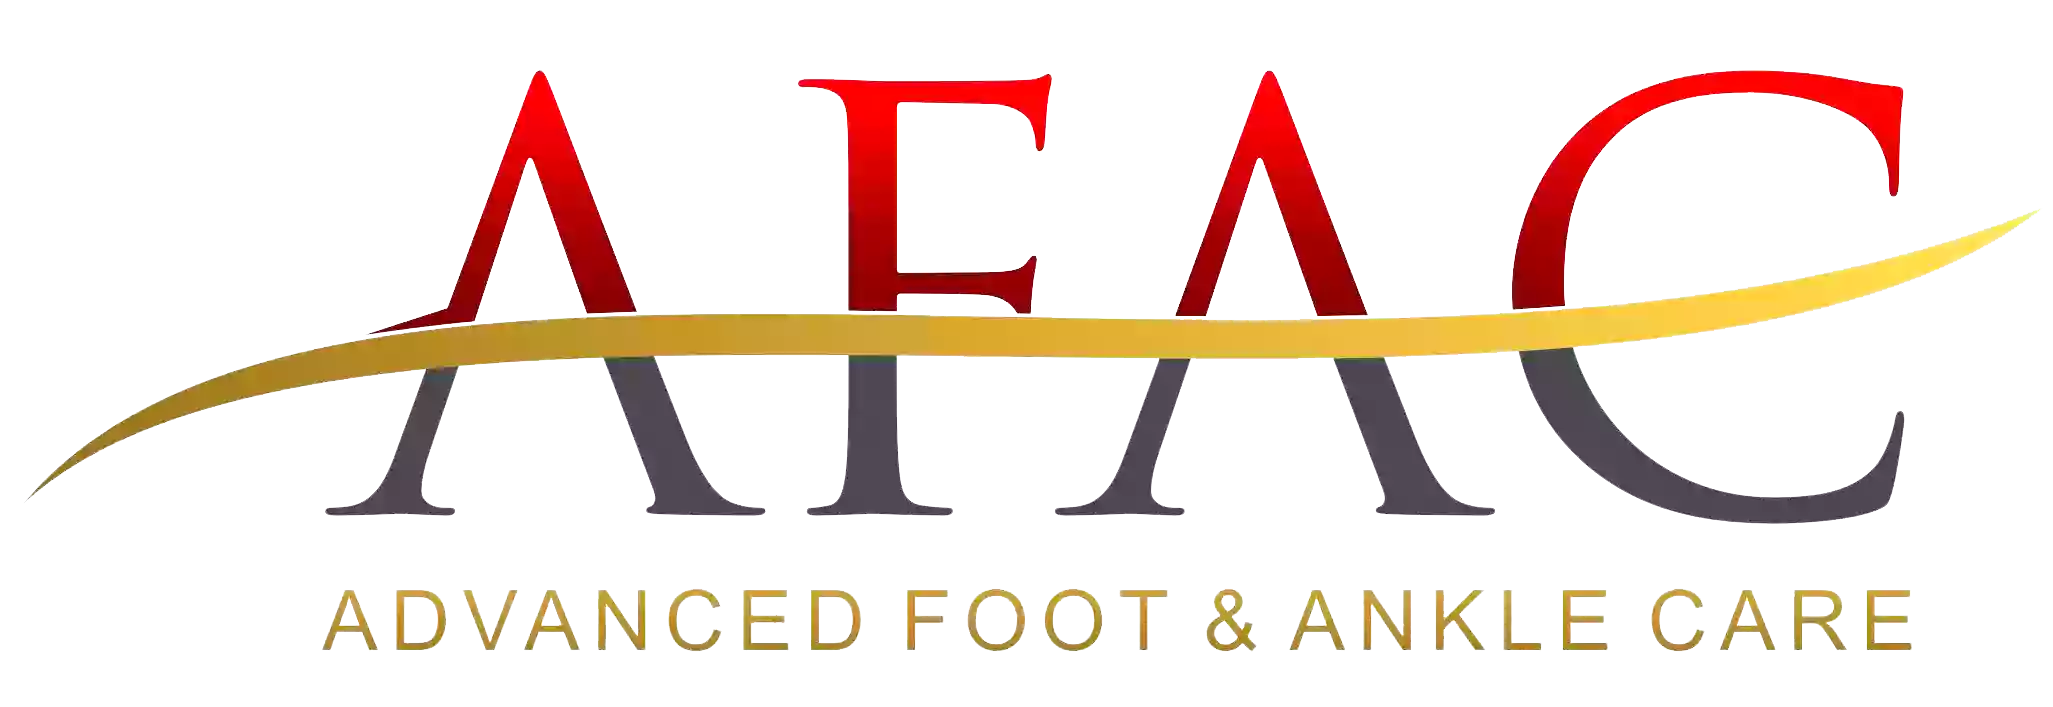 Advanced Foot & Ankle Care